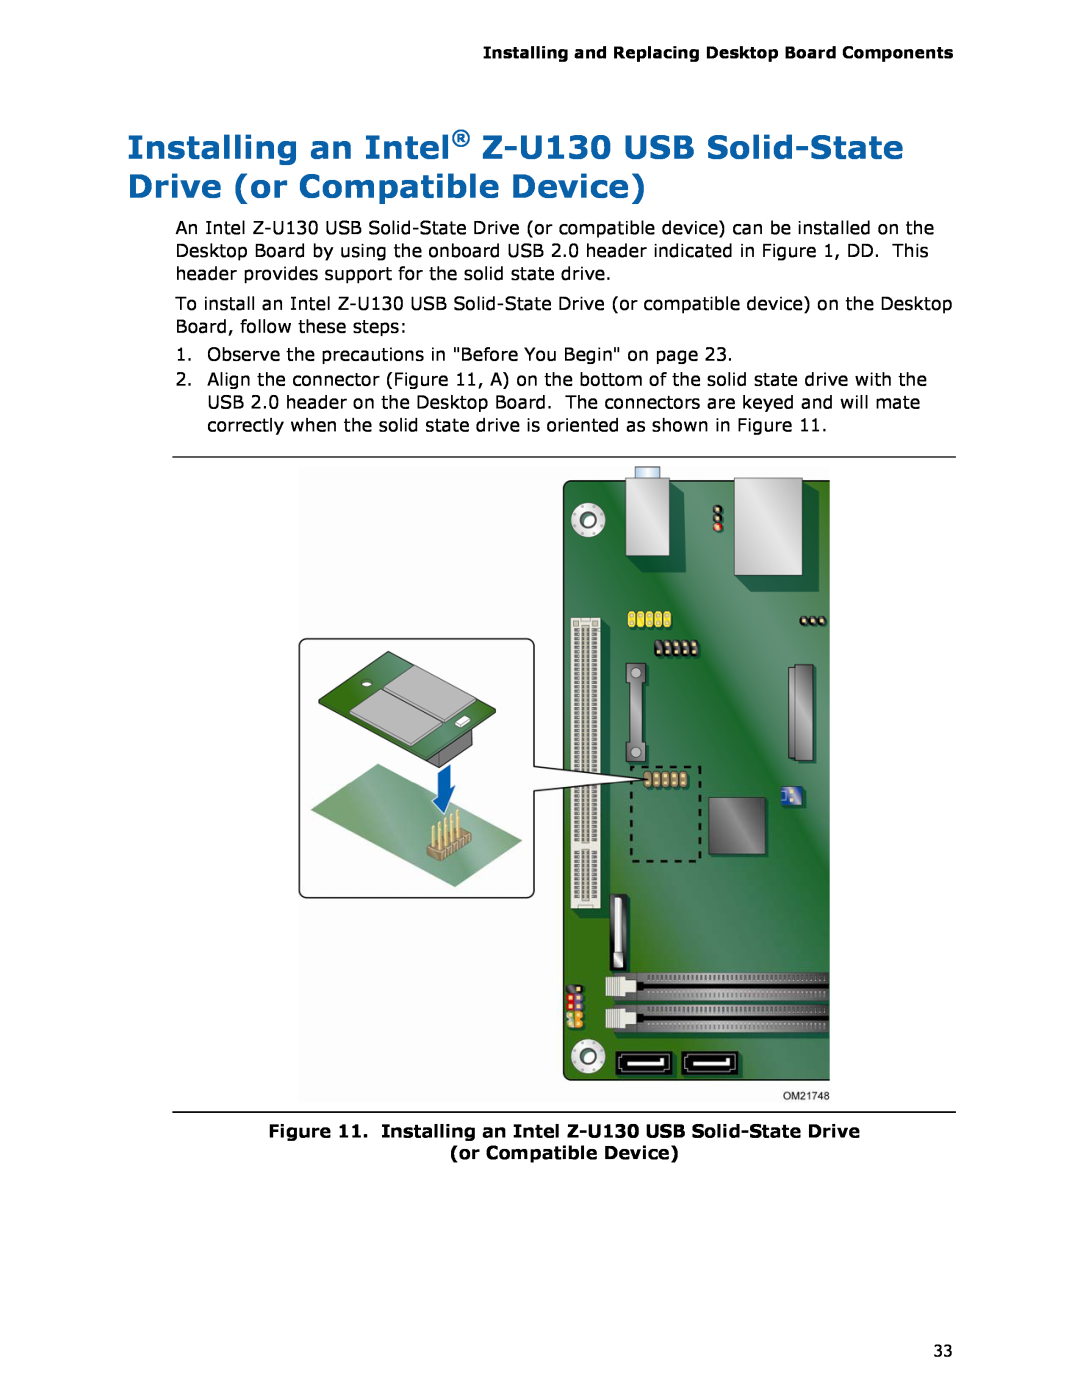 Intel D510MO manual Installing an Intel Z-U130 USB Solid-State Drive or Compatible Device 